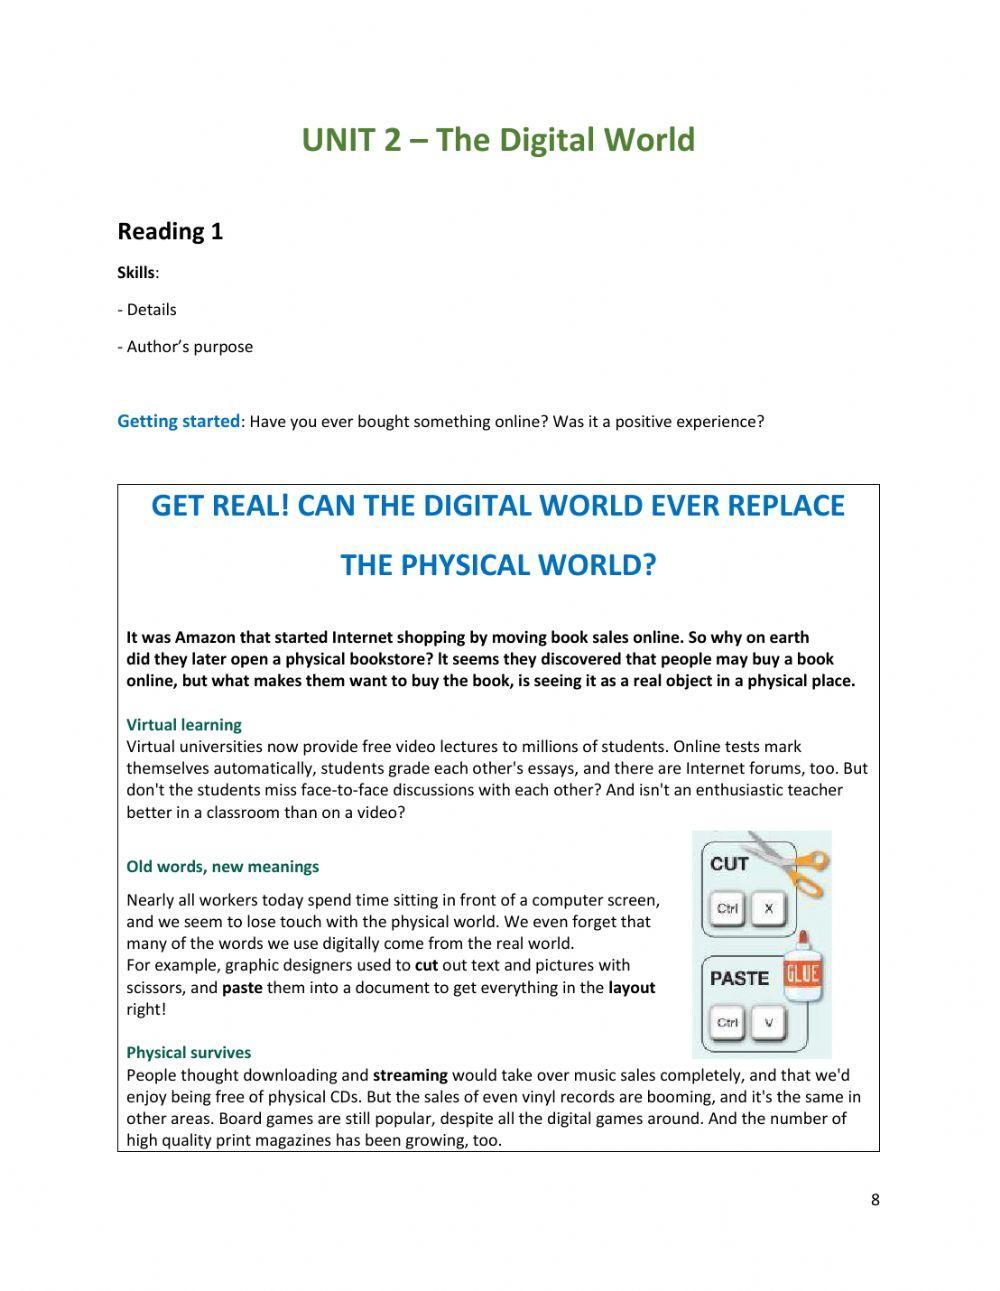 GET REAL! CAN THE DIGITAL WORLD EVER REPLACE THE PHYSICAL WORLD?